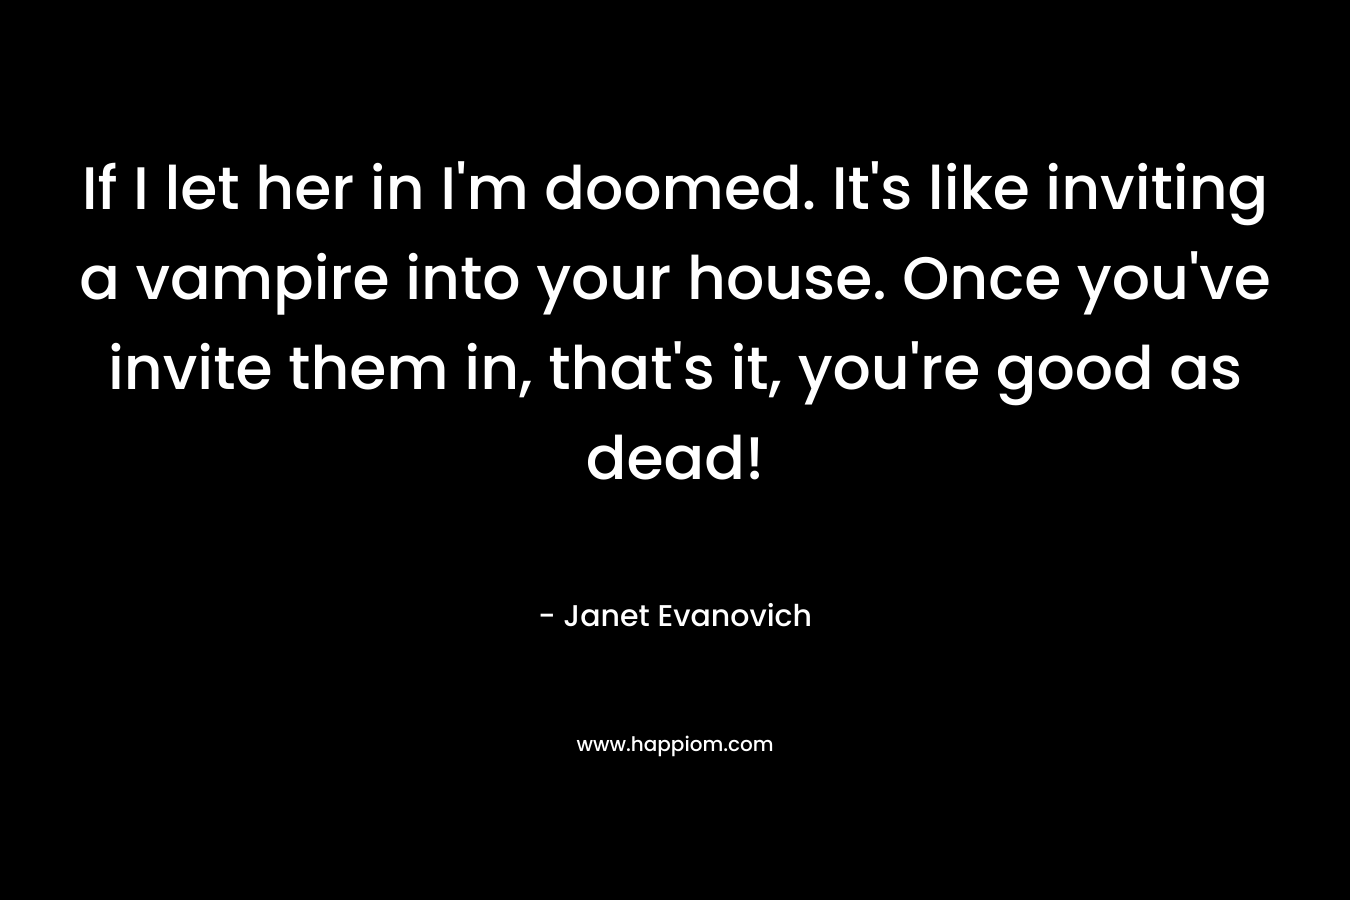 If I let her in I’m doomed. It’s like inviting a vampire into your house. Once you’ve invite them in, that’s it, you’re good as dead! – Janet Evanovich